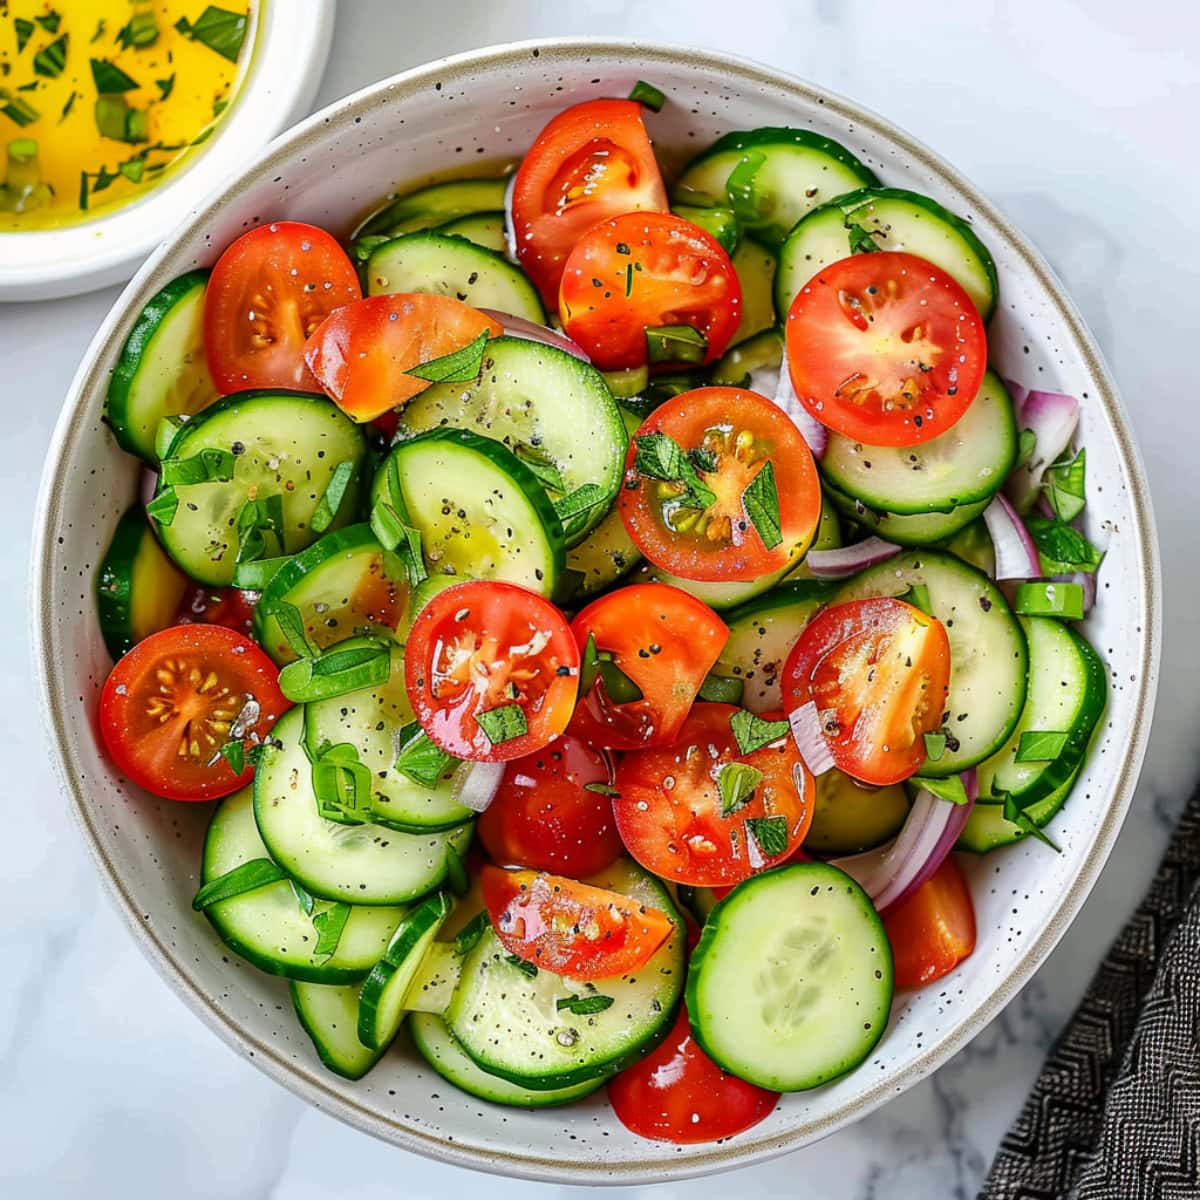 Tomato and cucumber salad combined with red onions and parsley.